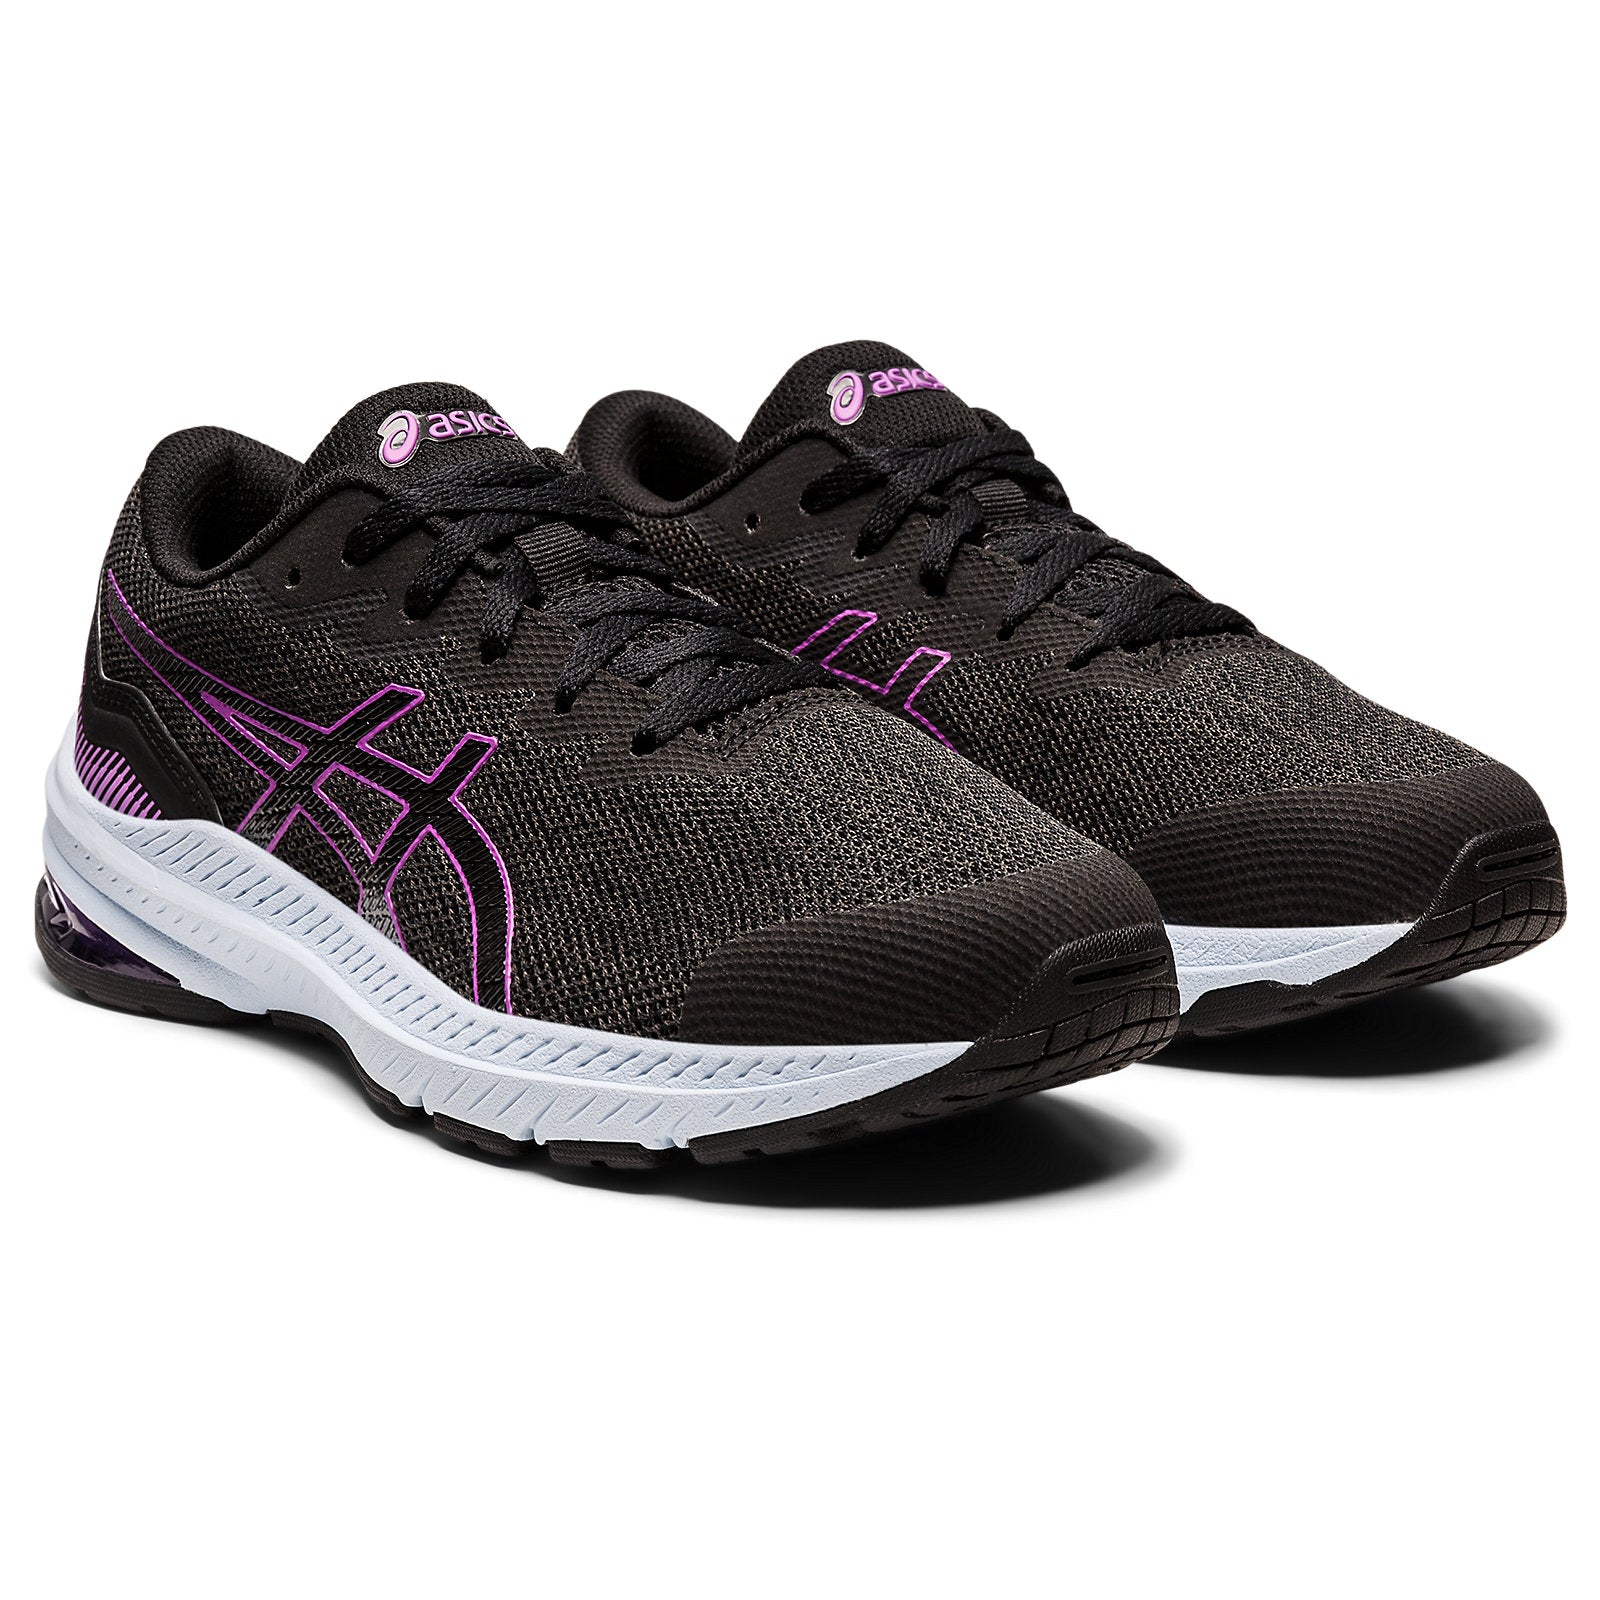 ASICS, GT-1000™ 11, Kids, Graphite Grey/Orchid(023)